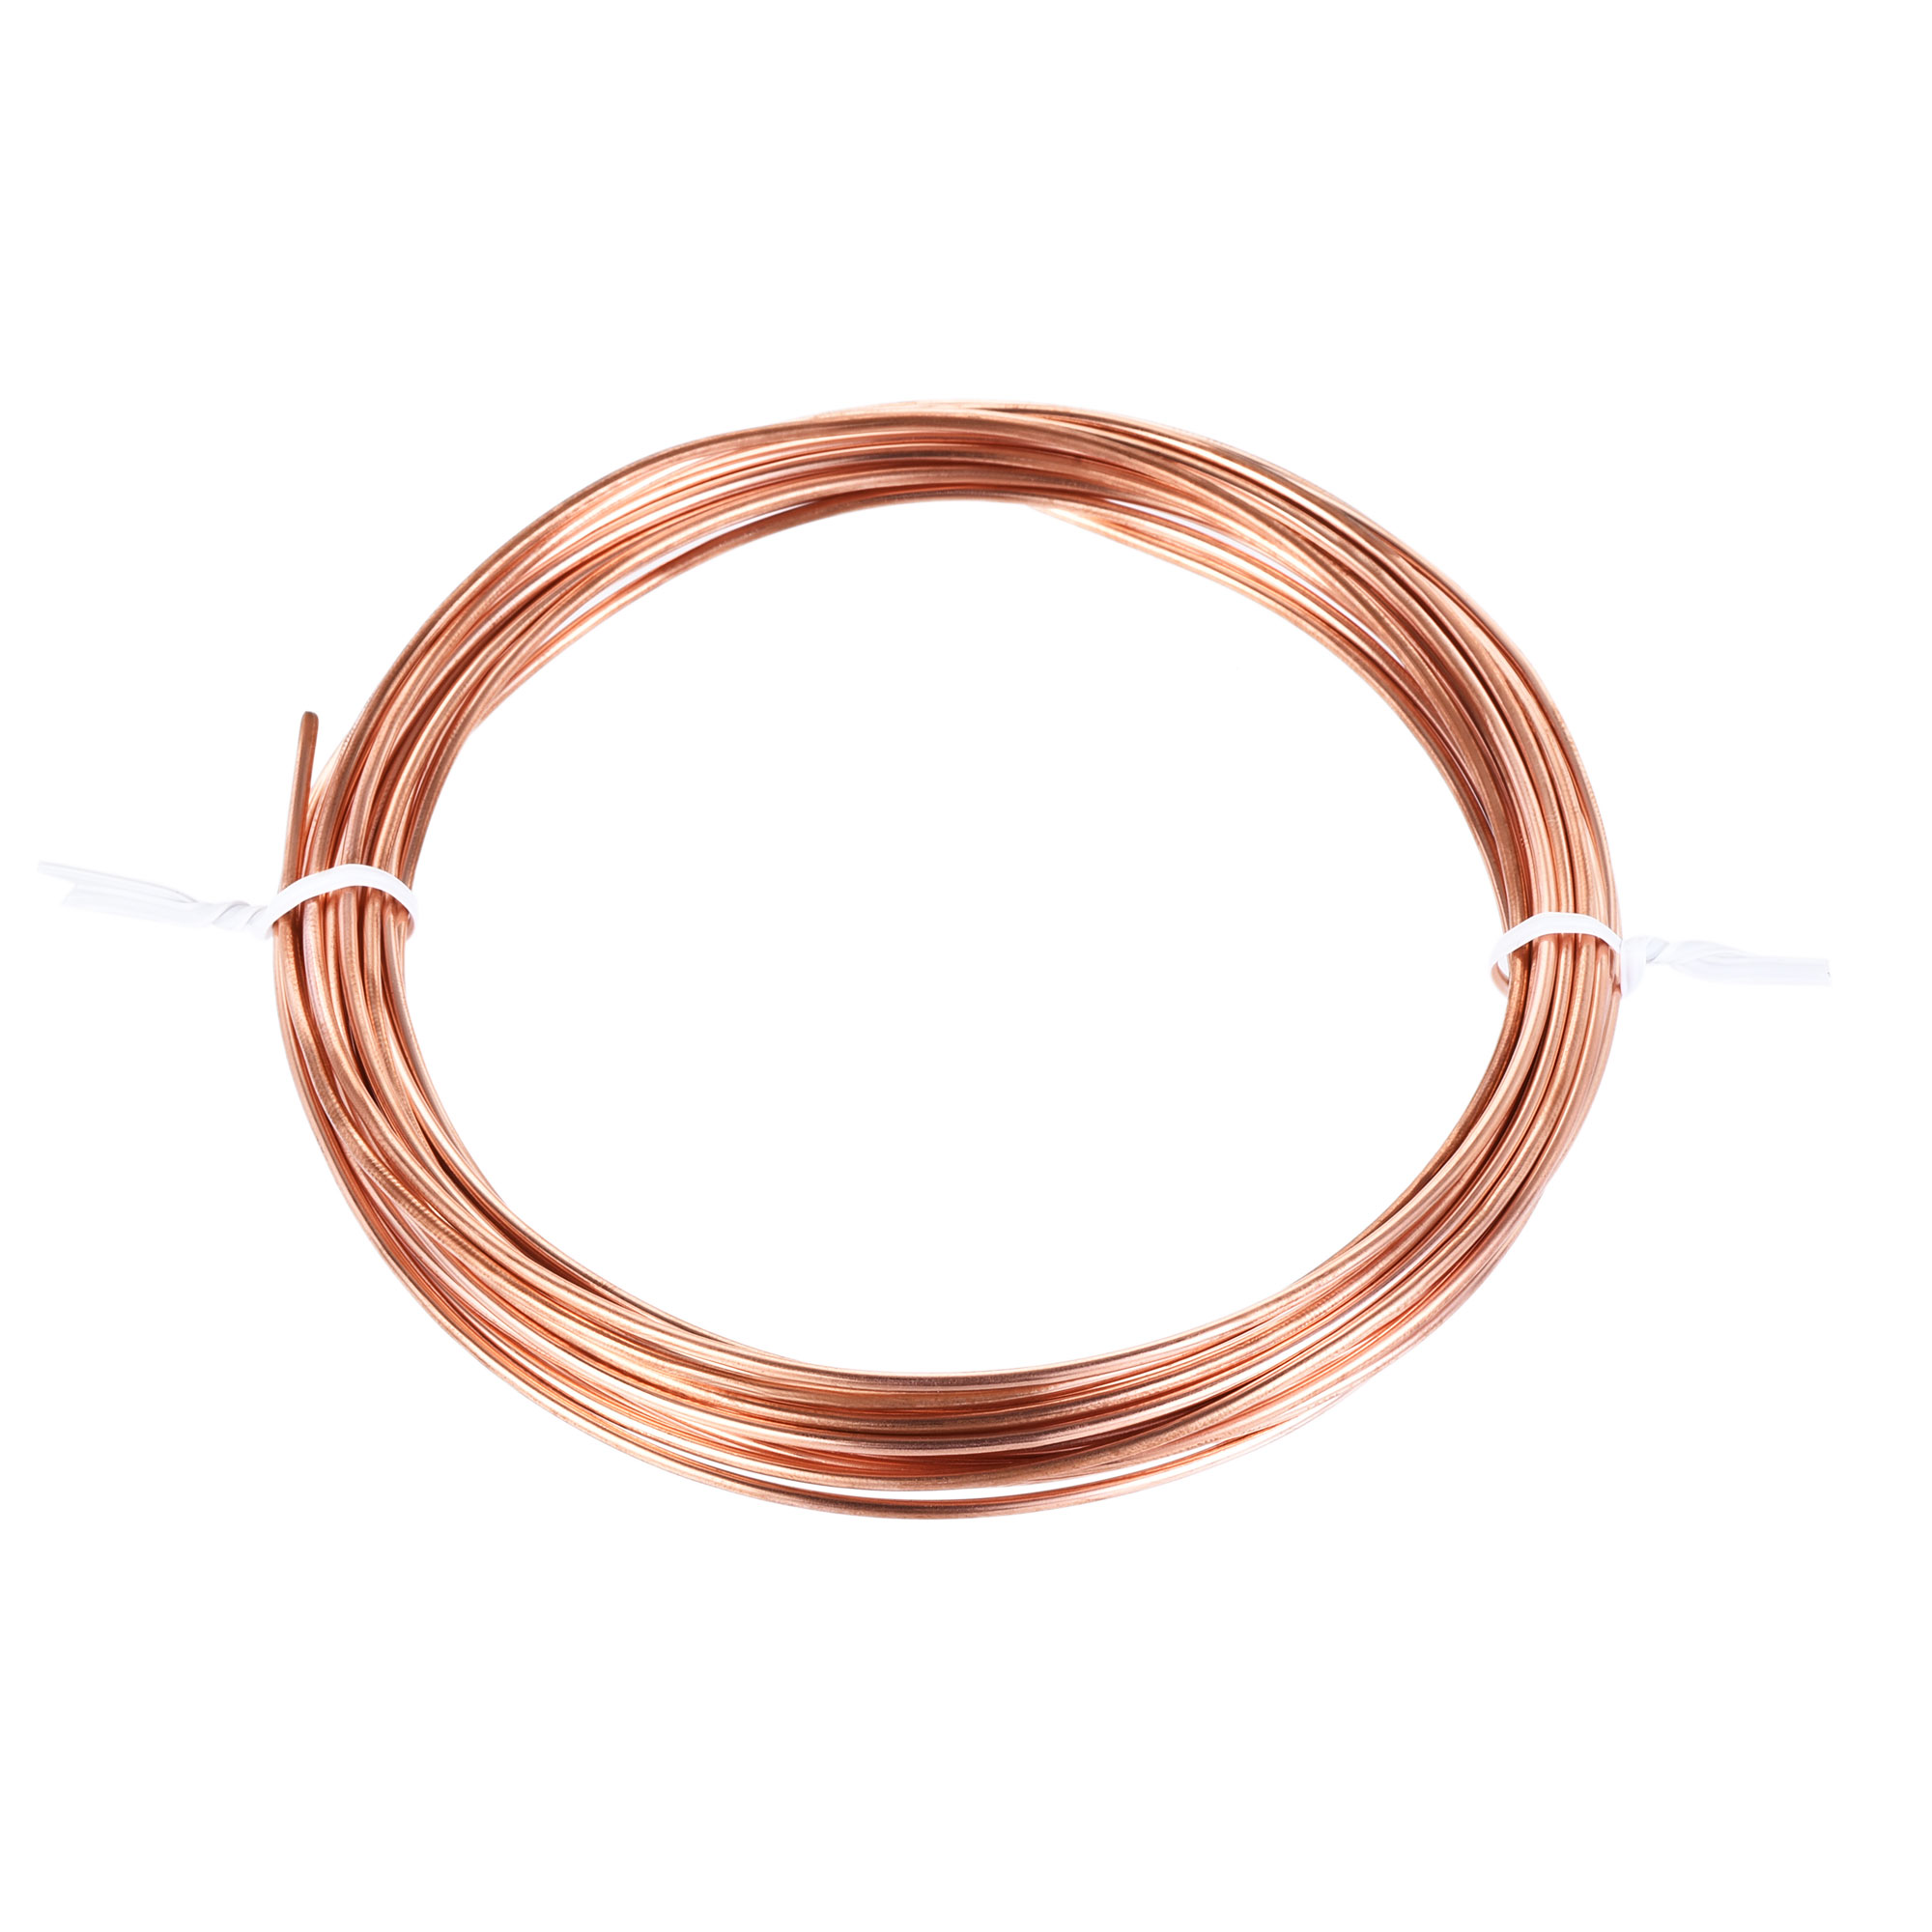 Unique Bargains Refrigeration Tubing 1.8mm OD x 0.8mm ID x 19.5Ft Length Copper Tubing Coil